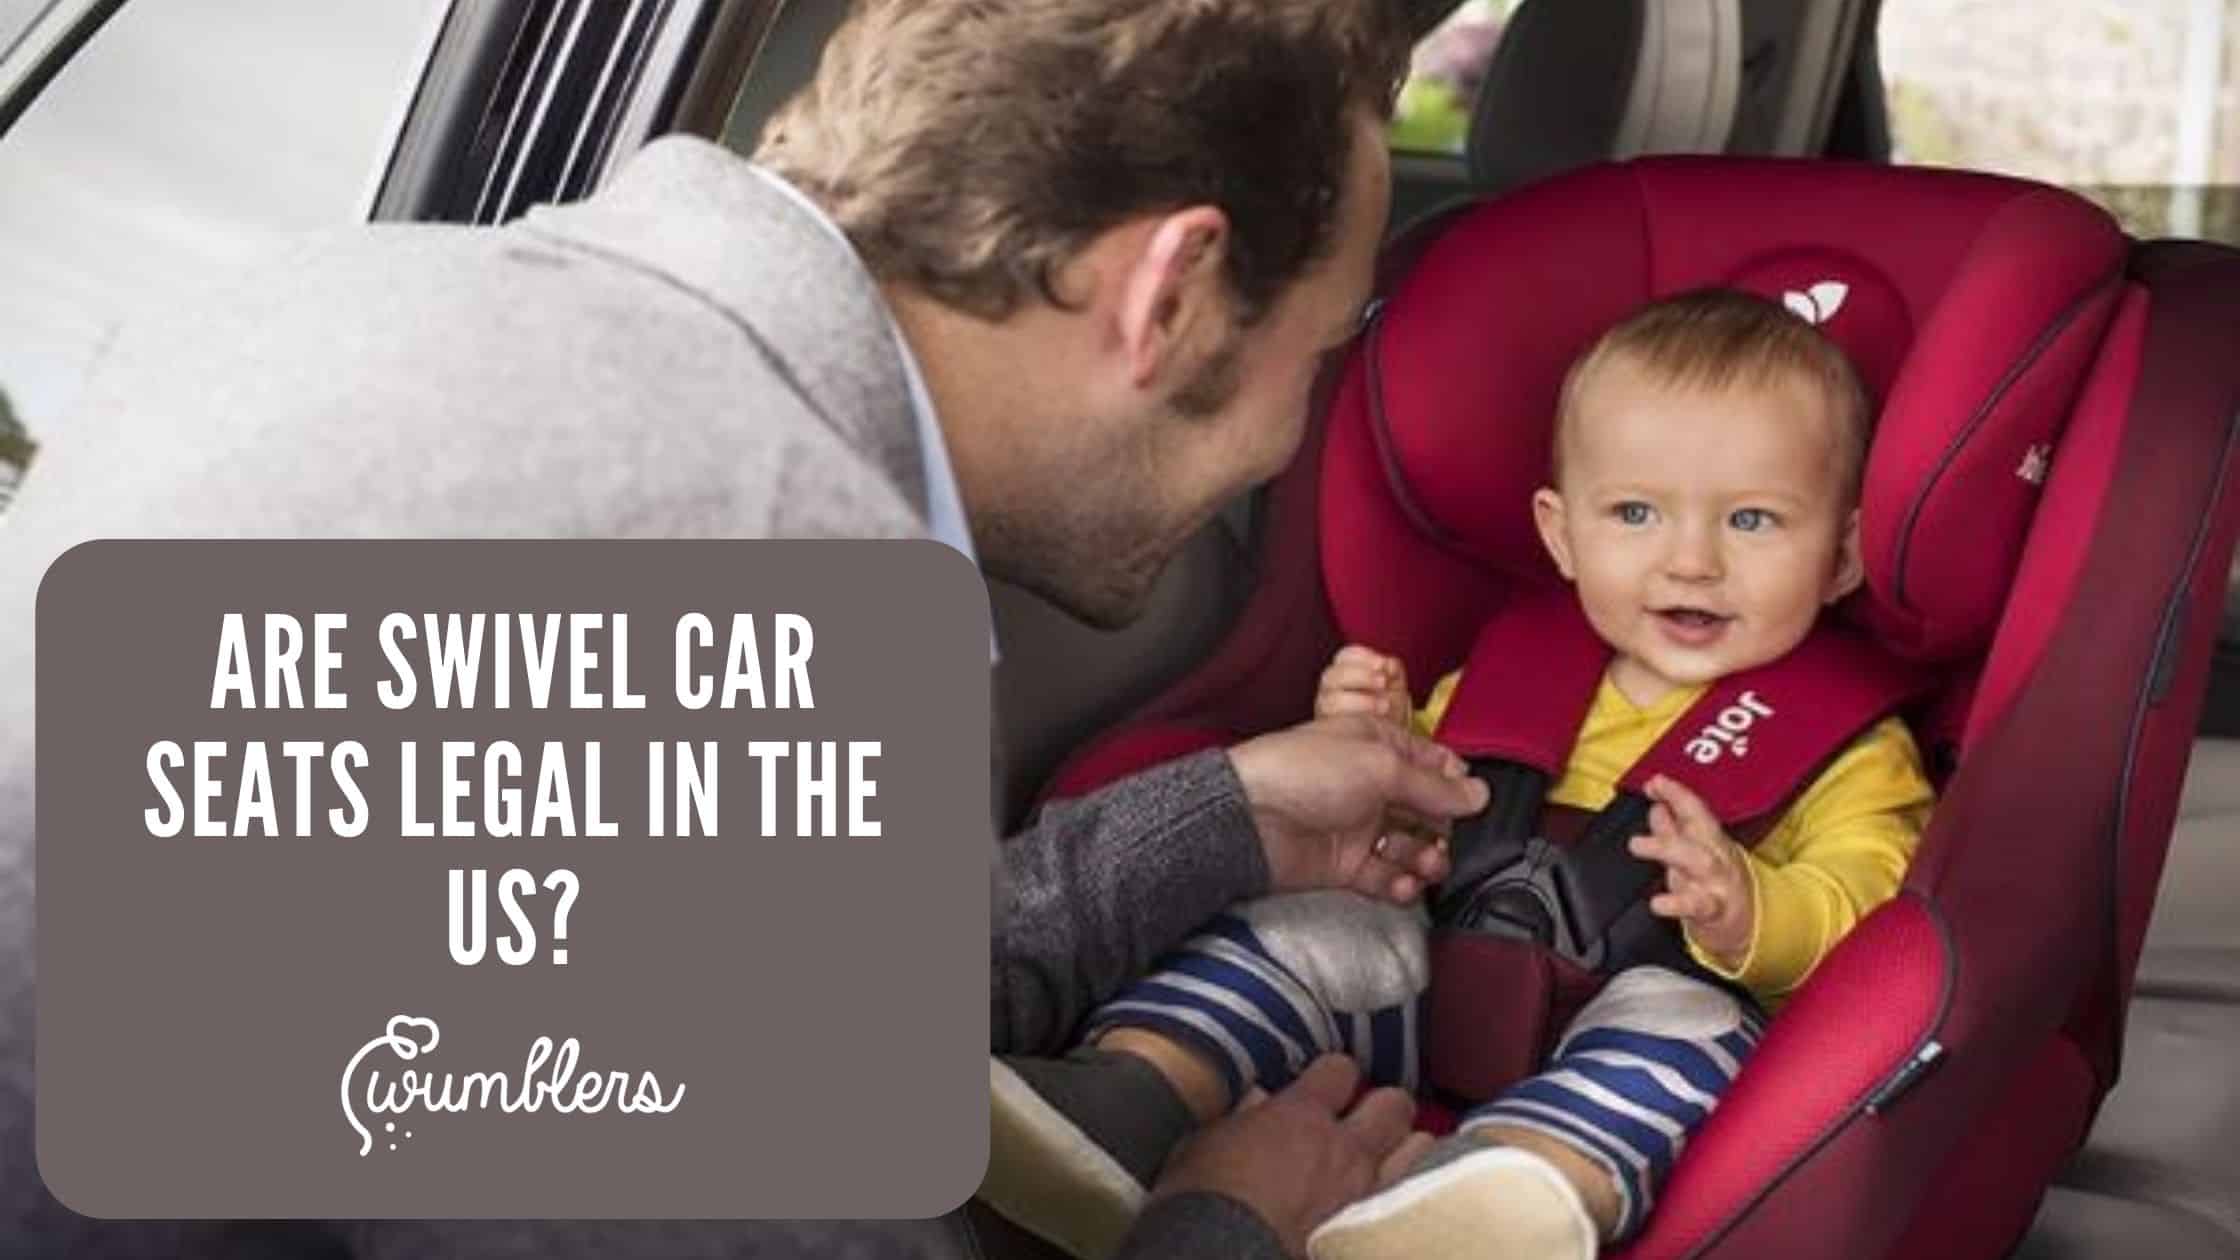 Are Swivel Car Seats Legal in the US